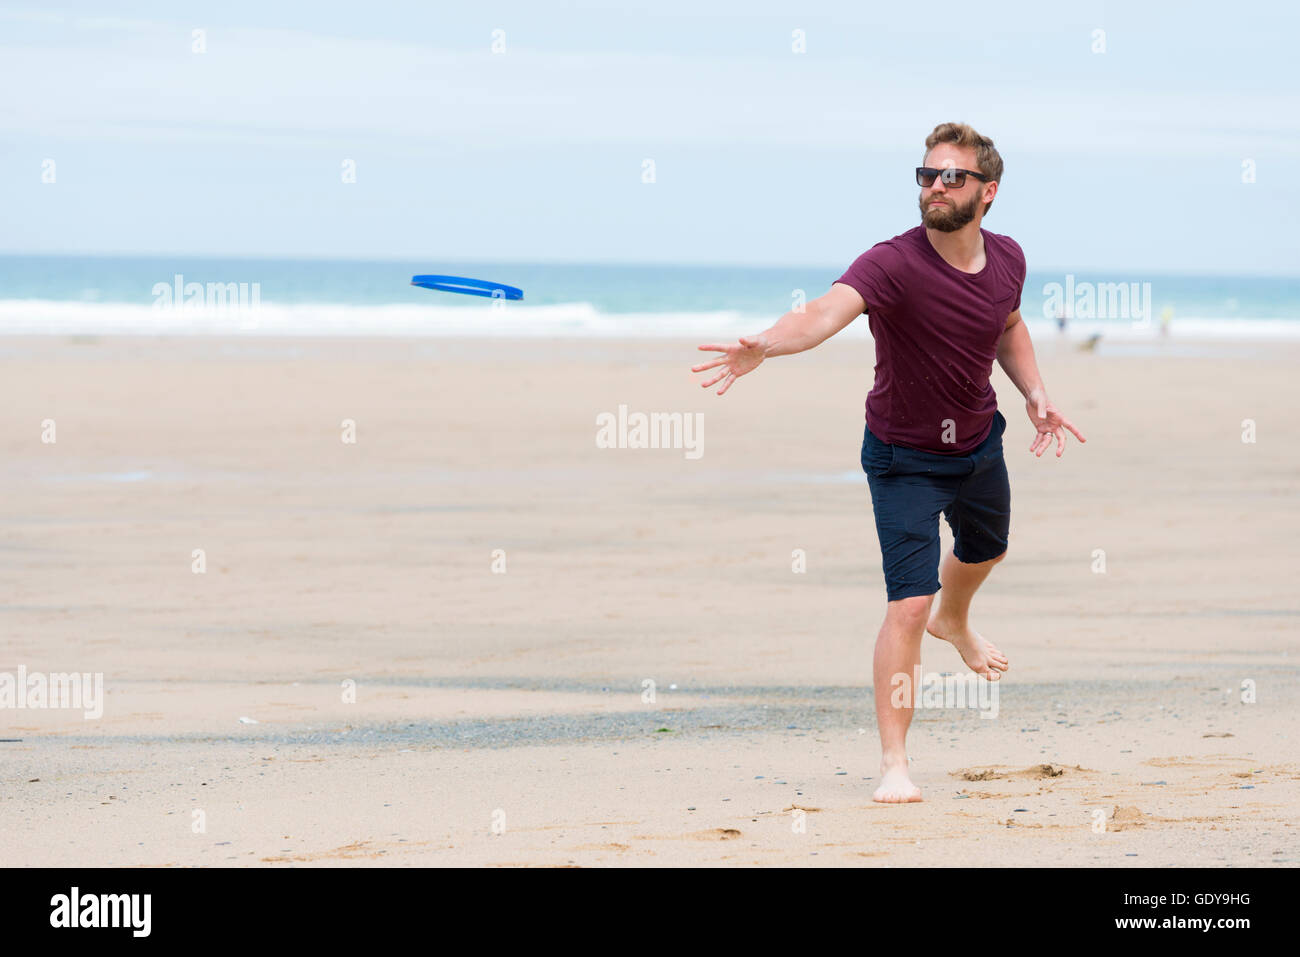 A young man playing a bat and ball game on a beach wearing casula clothes in summer UK Stock Photo